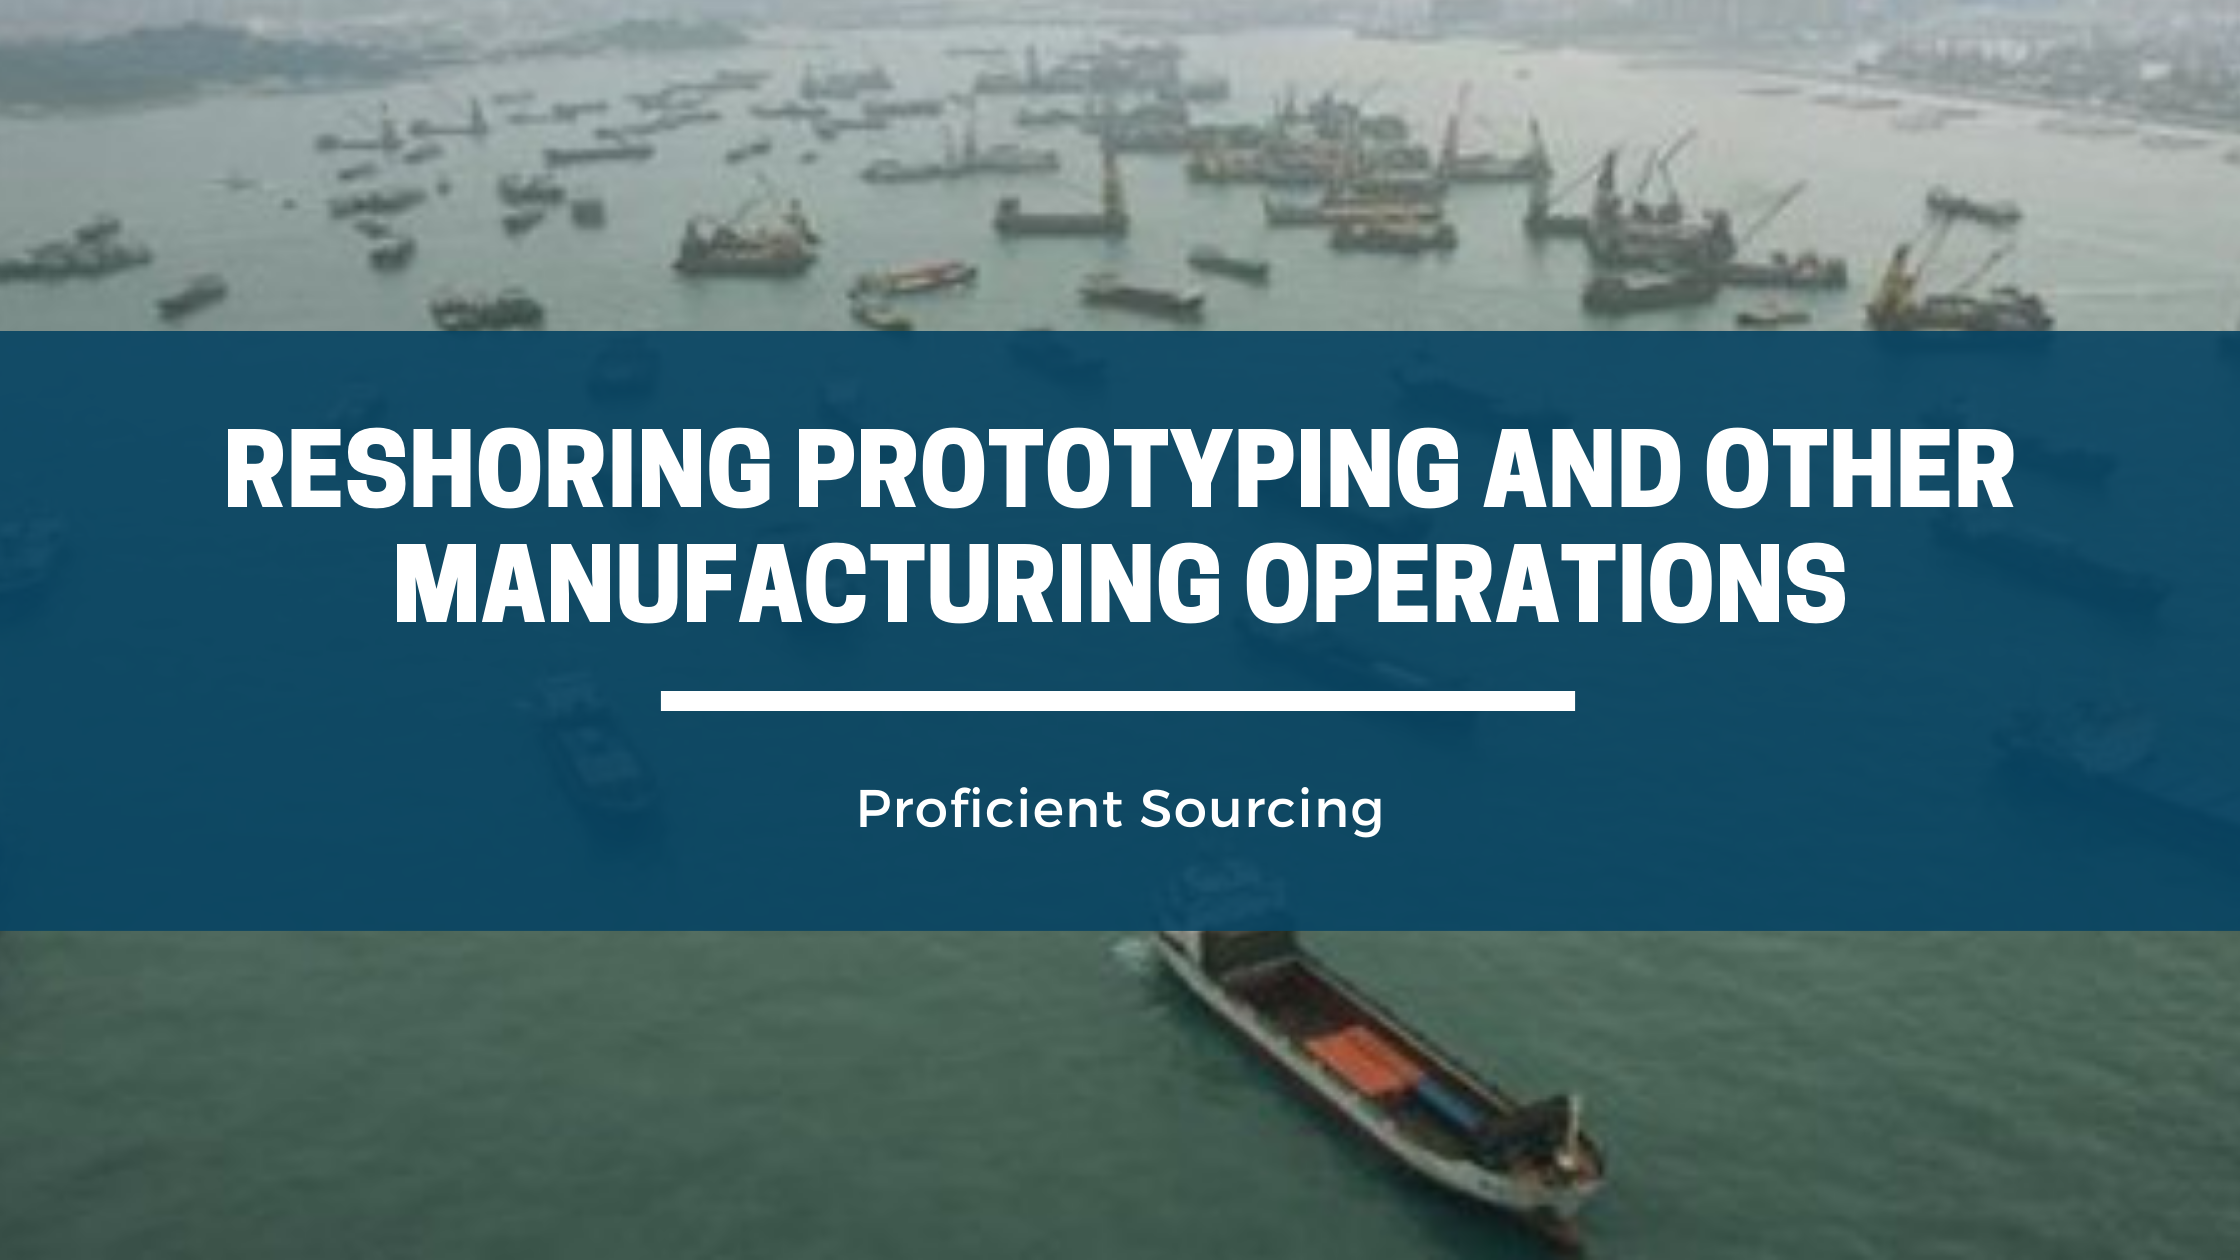 Reshoring Prototyping and Other Manufacturing Operations